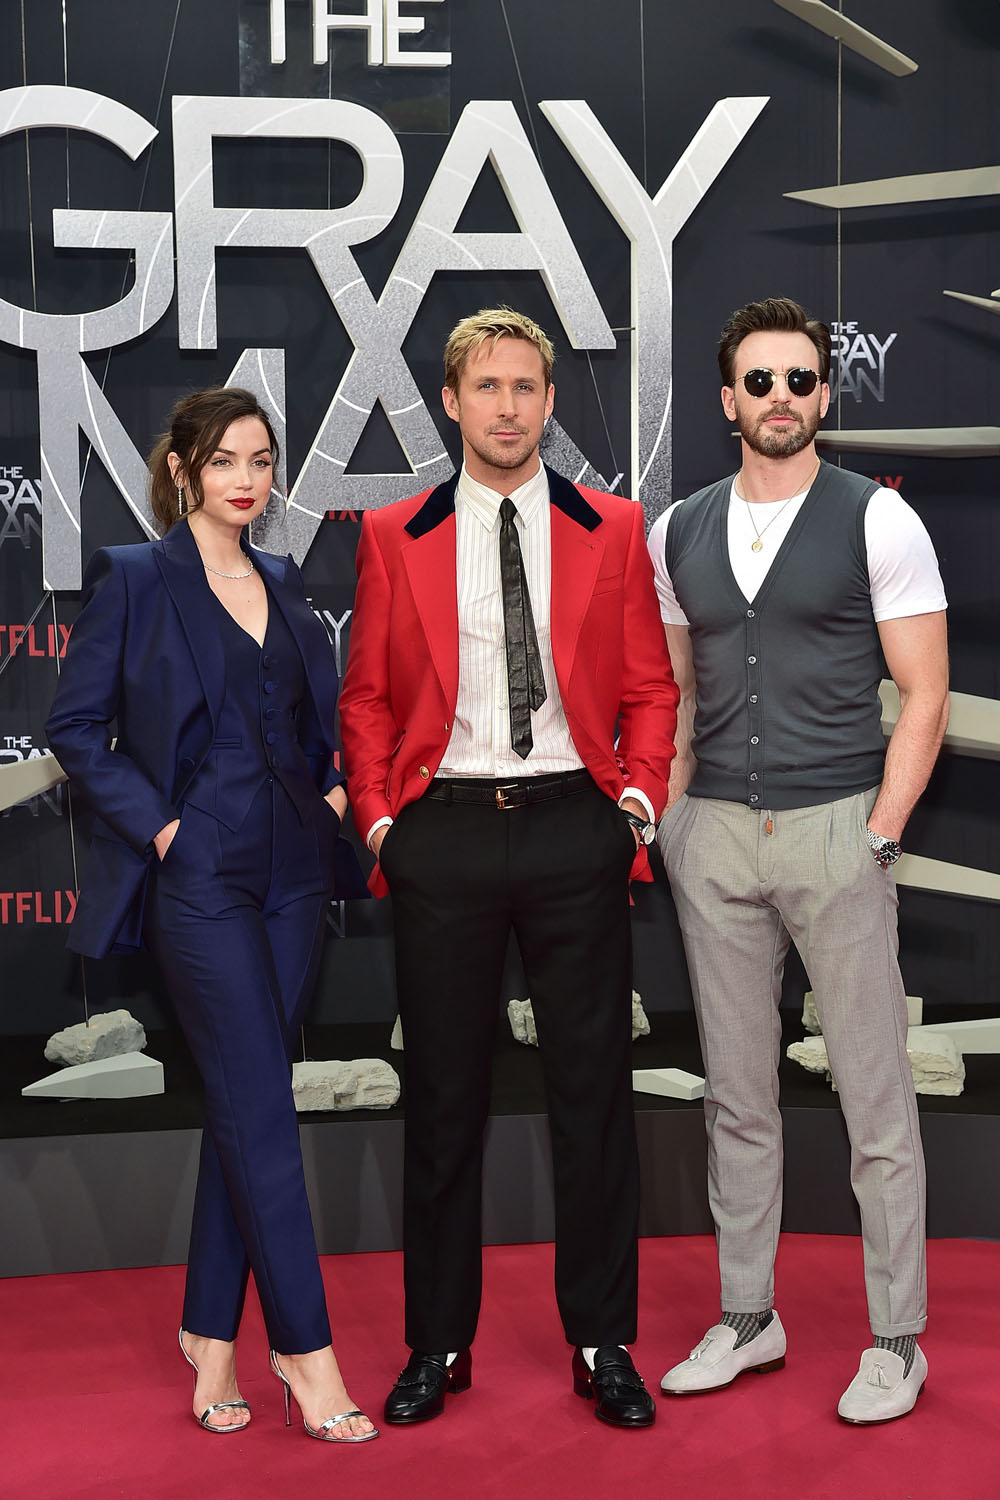 The Gray Man' - Ryan Gosling and Chris Evans wow fans in Berlin - About  Netflix